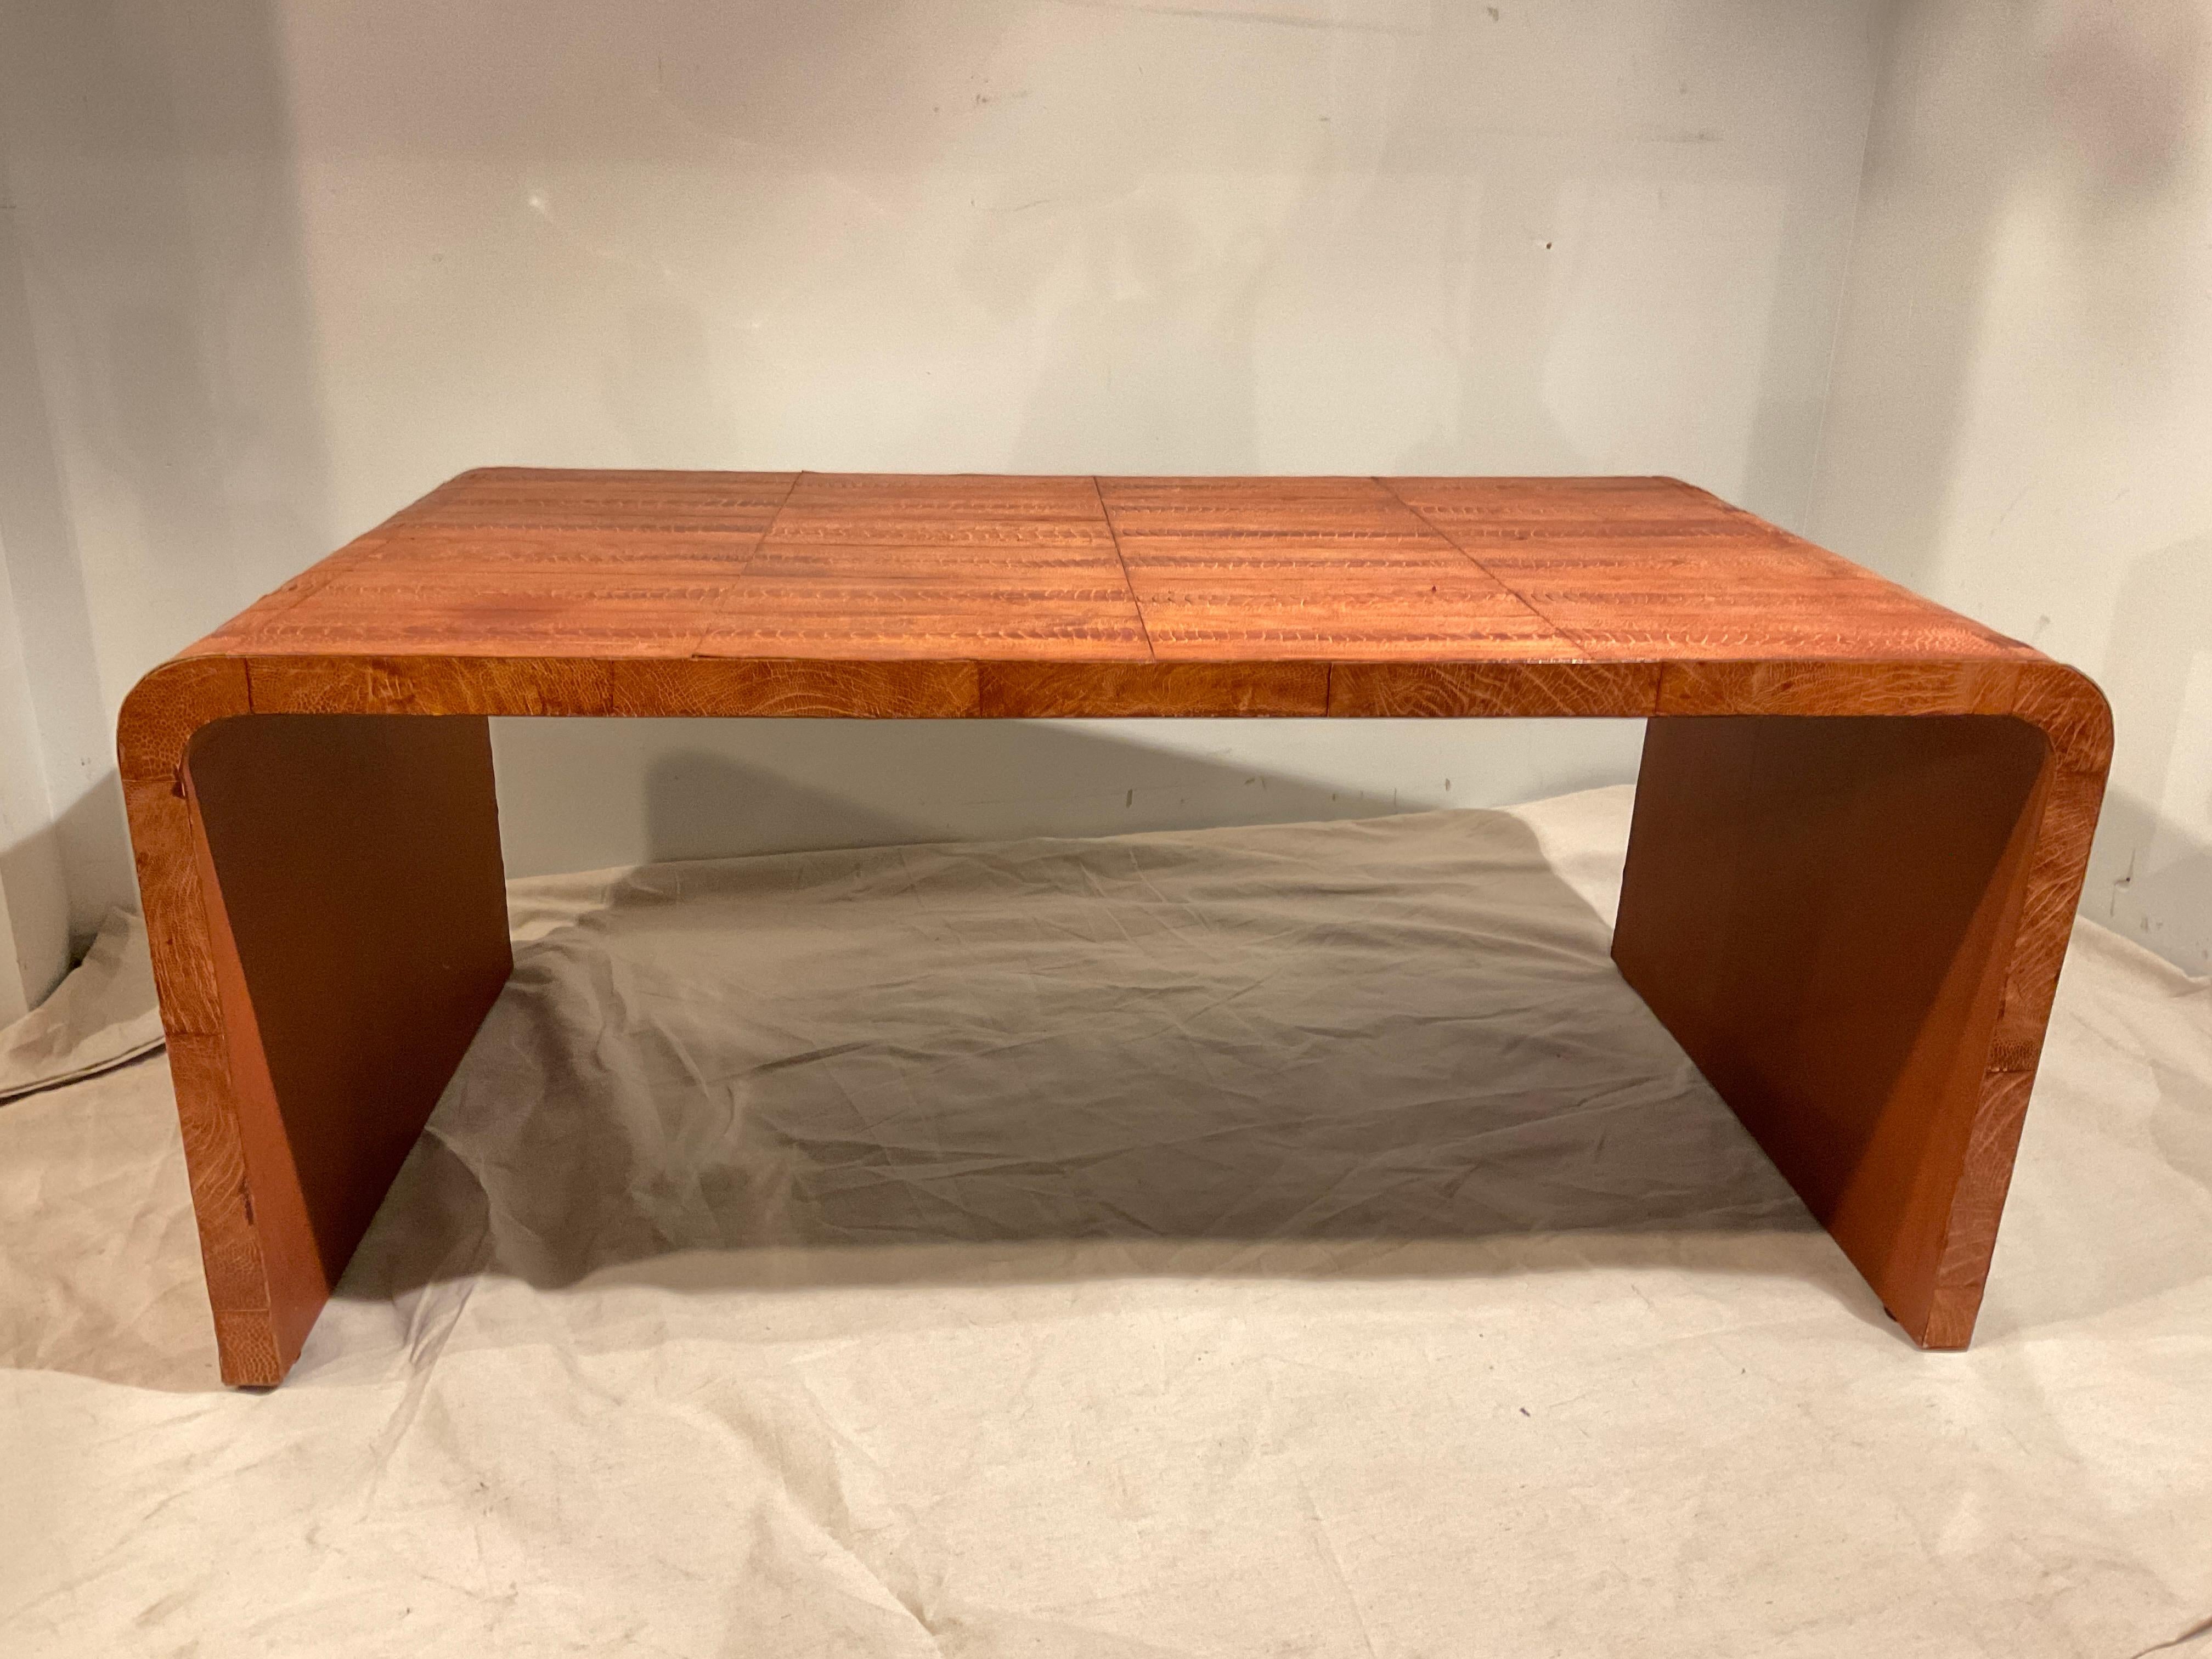 1980s Ostrich skin ( from the leg ) coffee table. A few  nicks  in skin as shown in pictures.